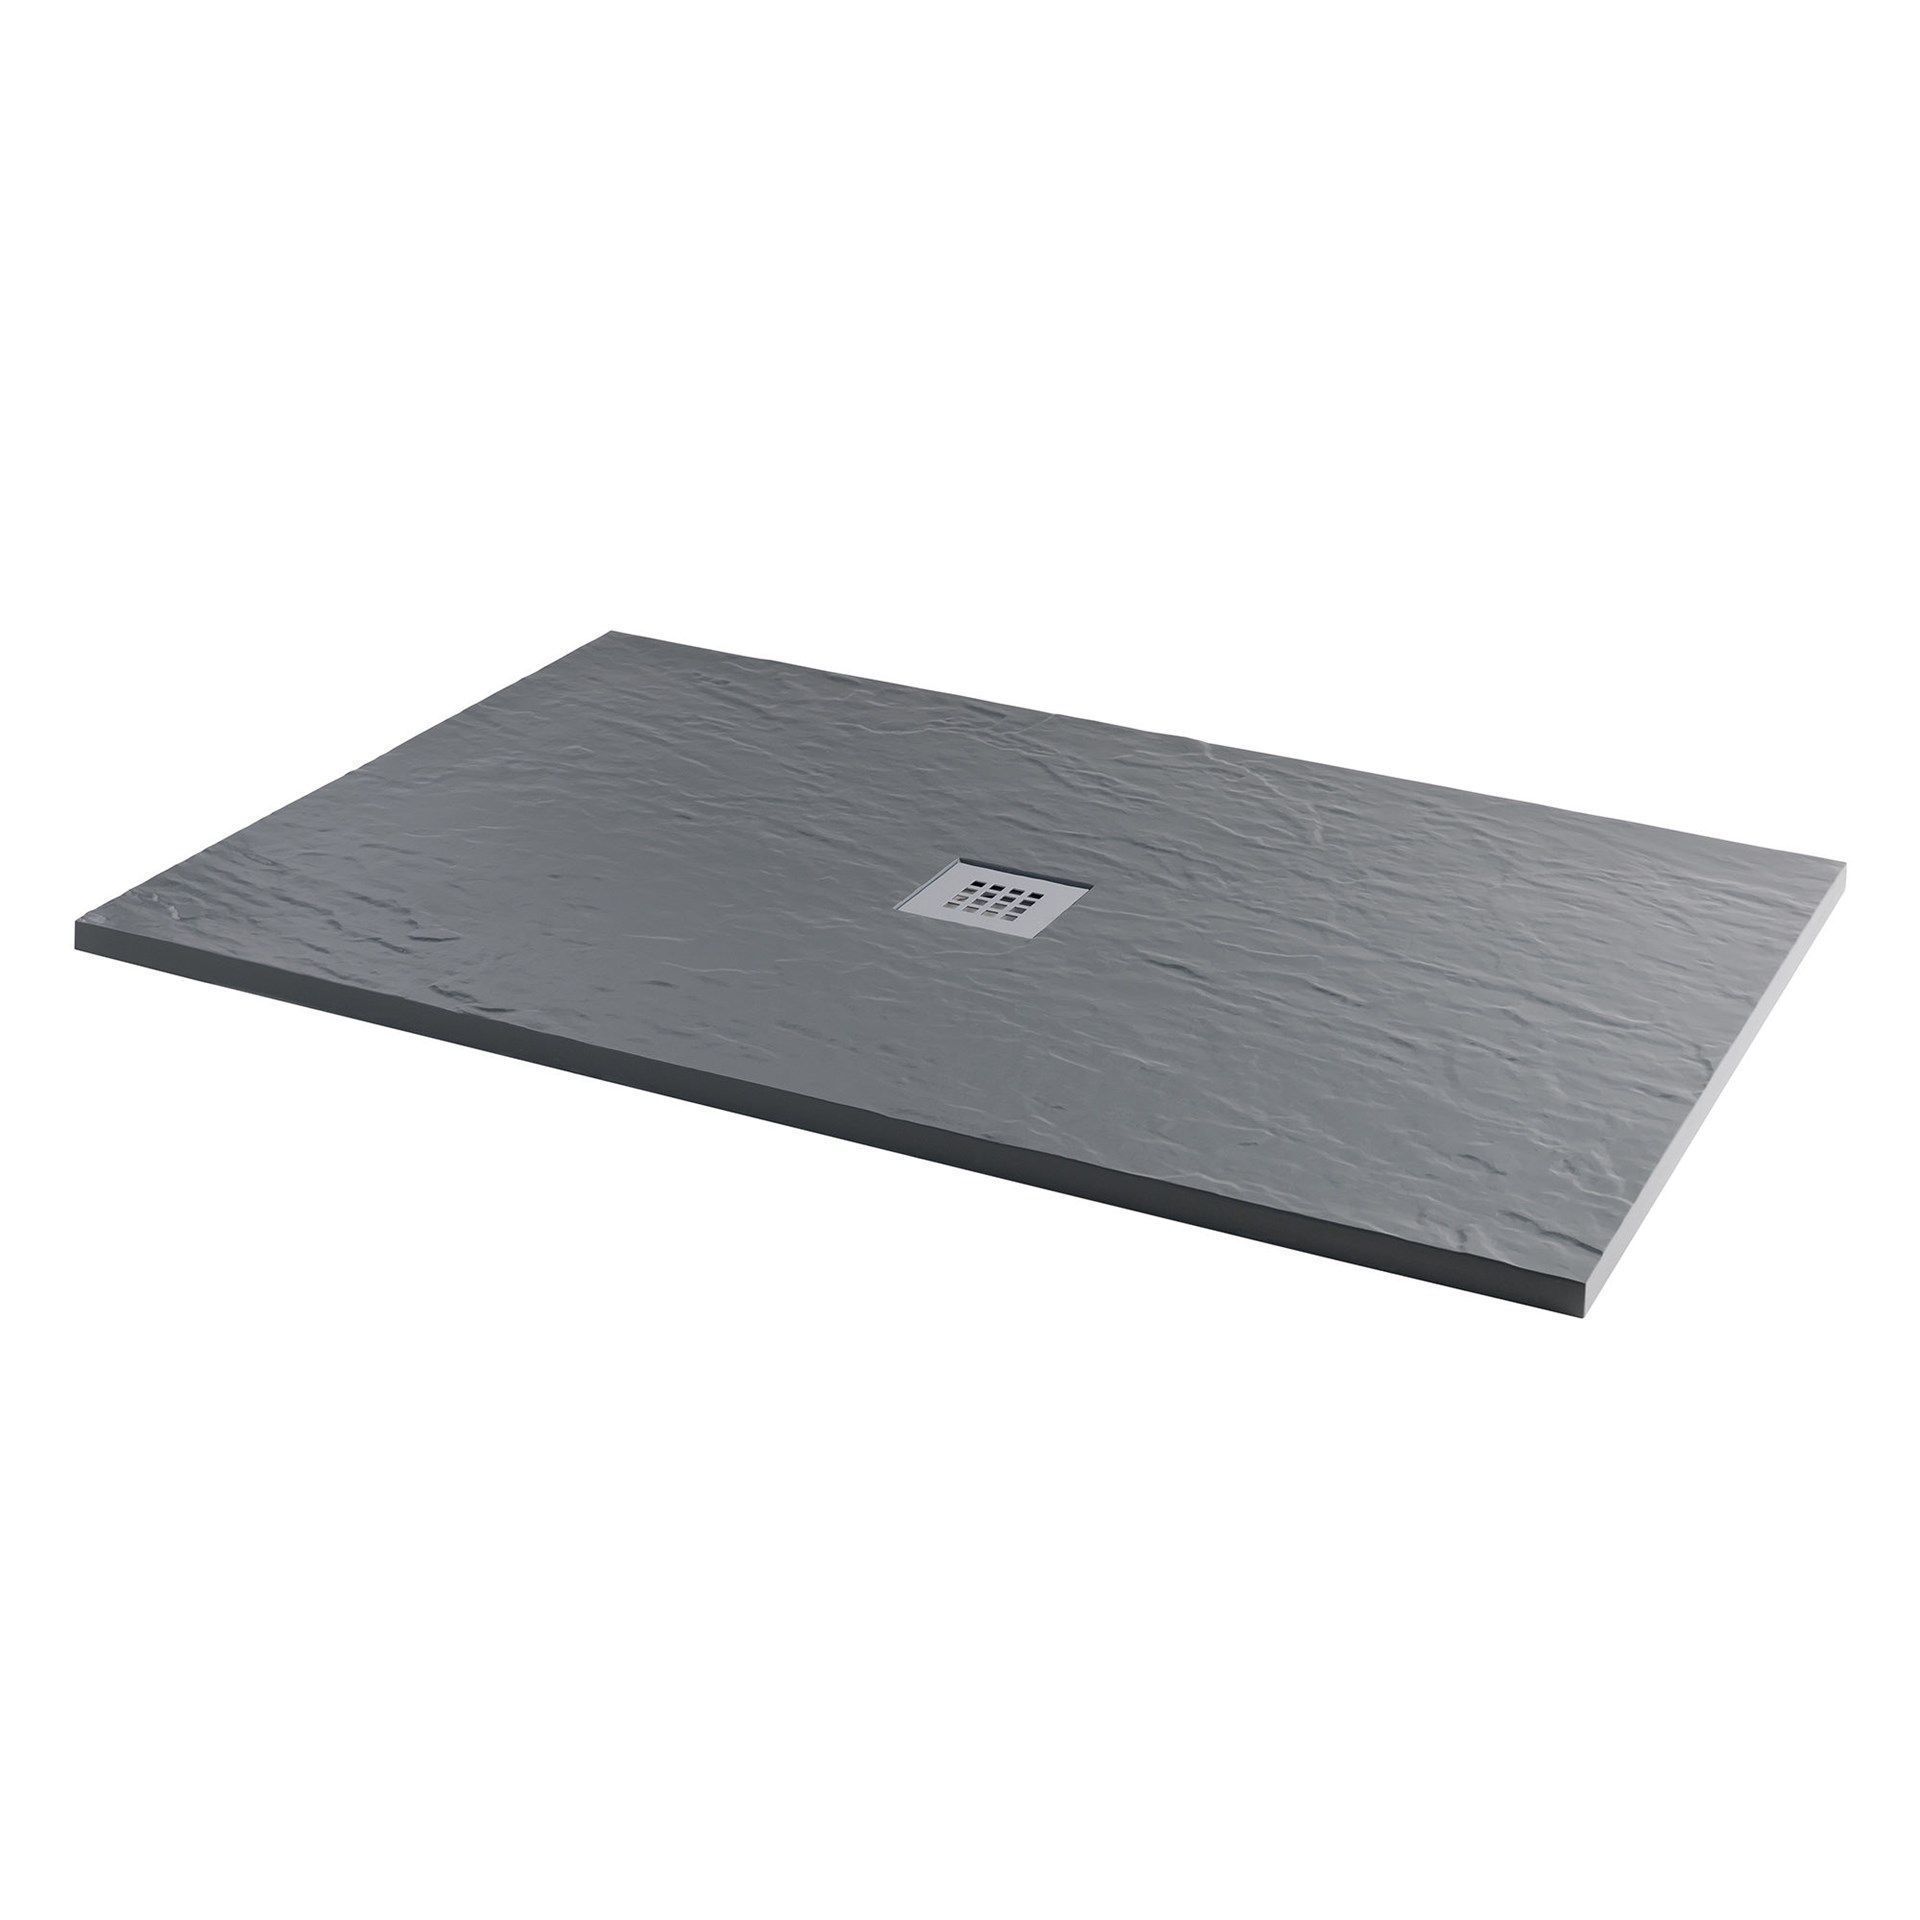 New 1000x800mm Rectangular Slate Effect Shower Tray In Grey. Manufactured In The Uk ... - Image 2 of 2